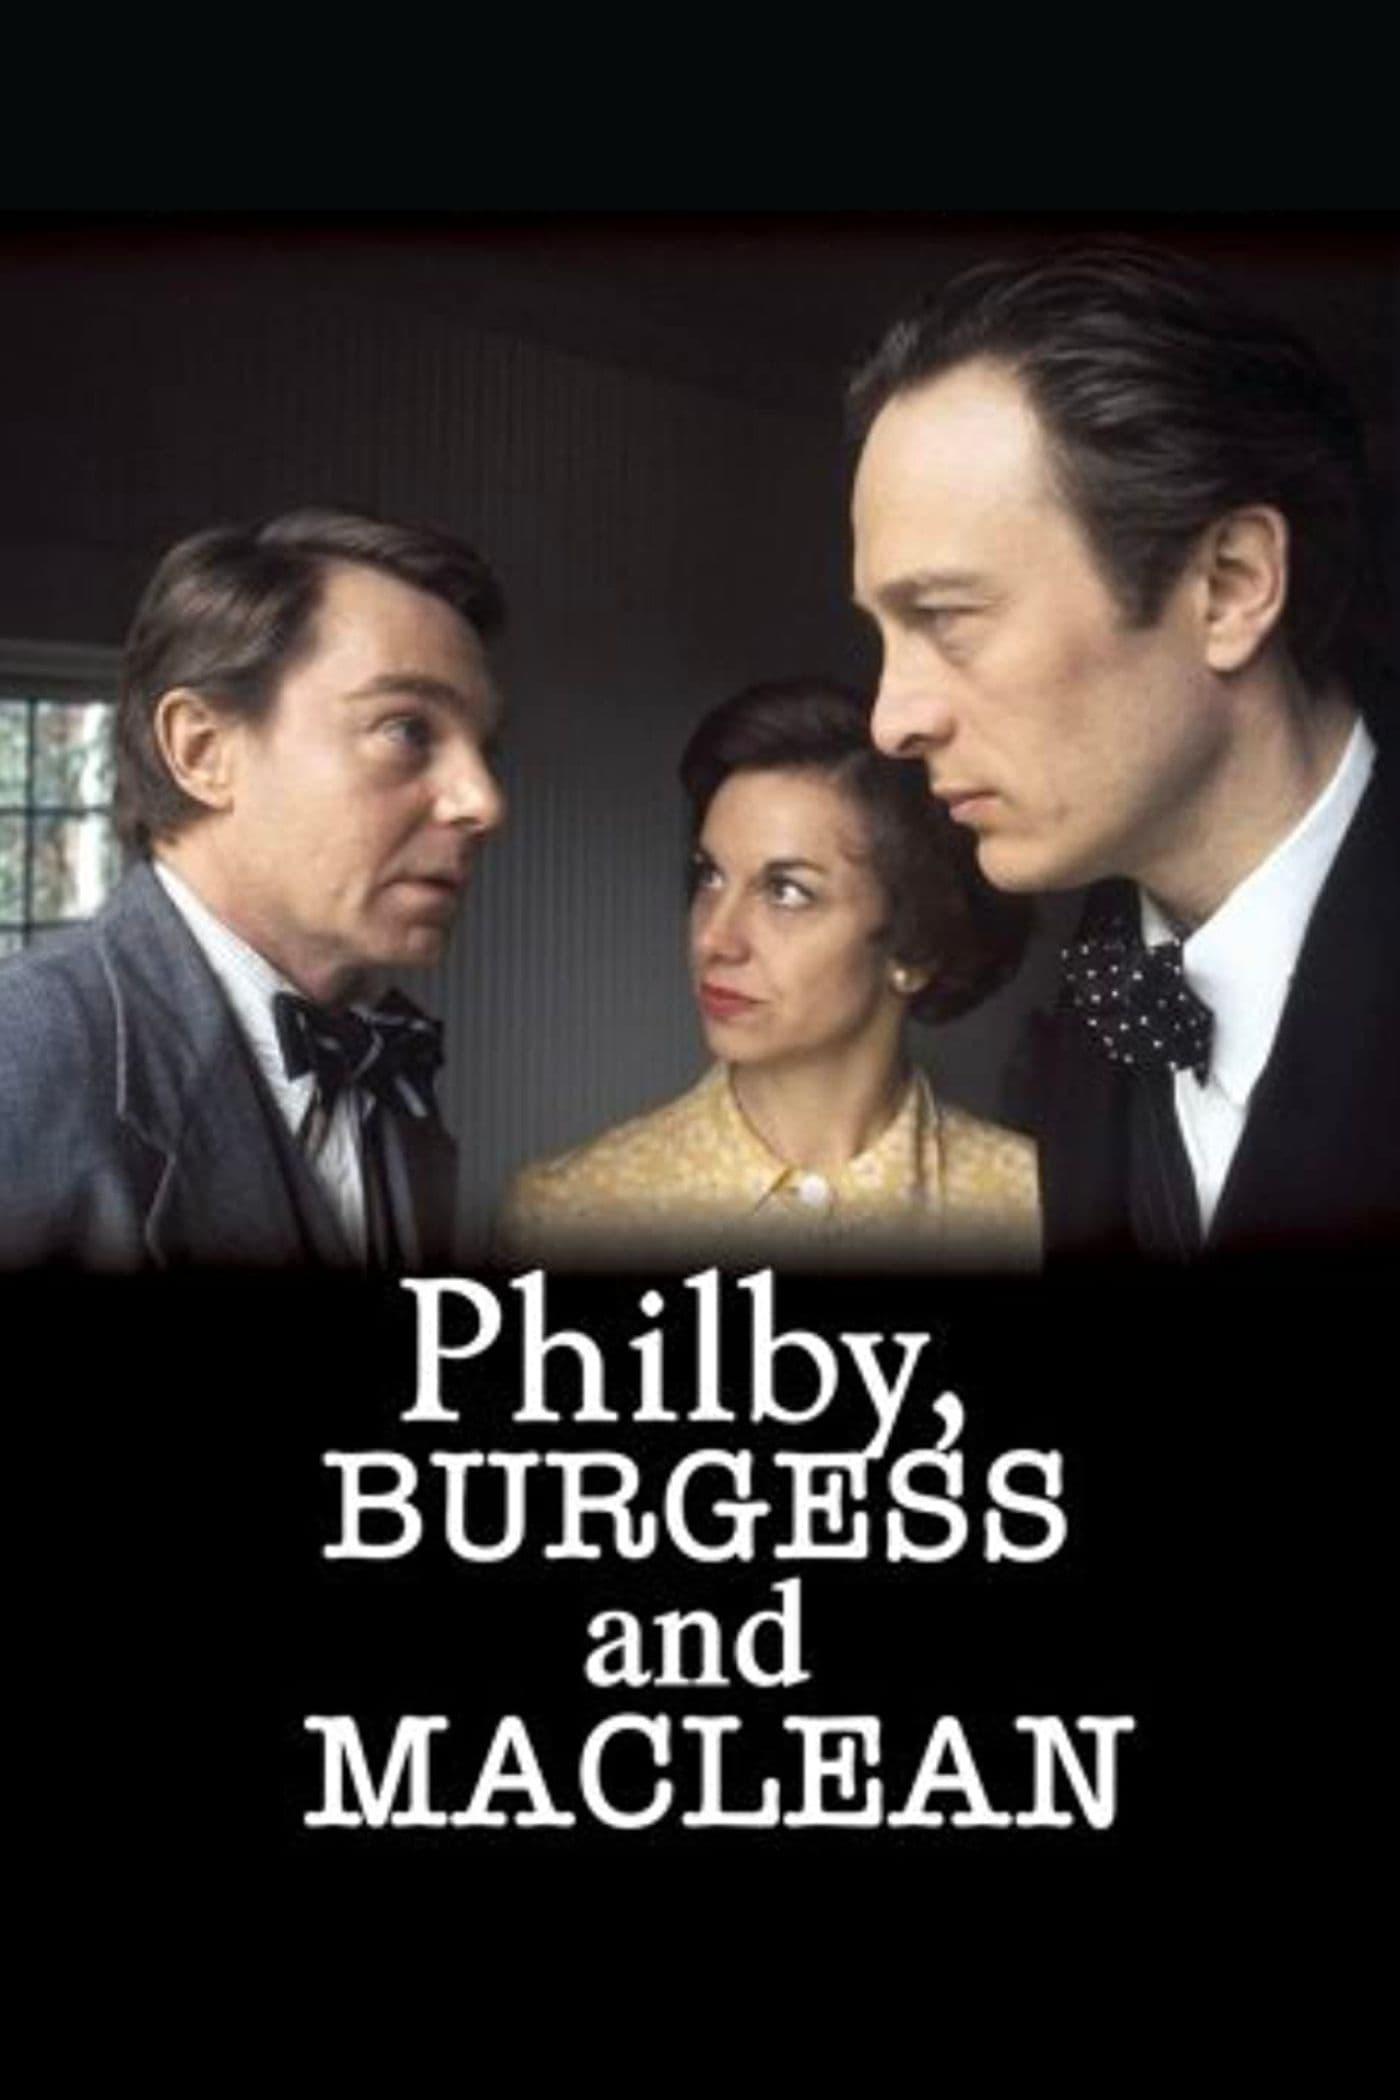 Philby, Burgess and Maclean poster